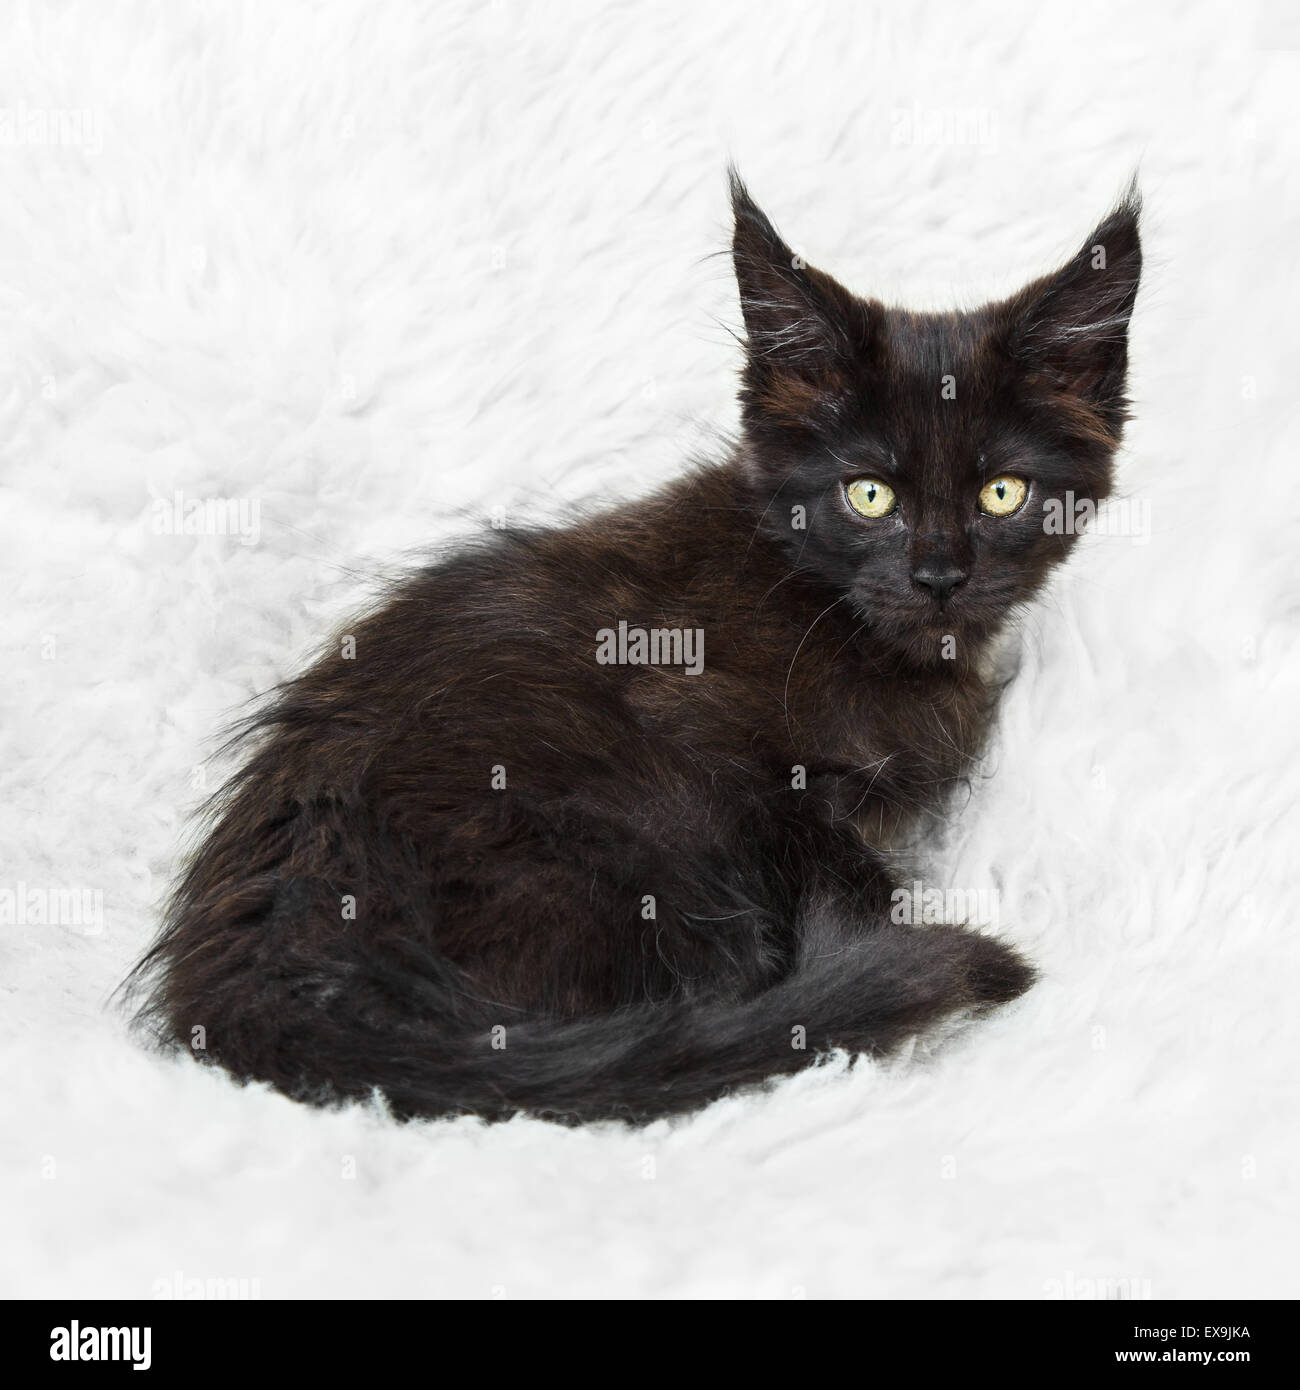 Small Black Kitten Maine Coon Posing On White Background Fur Stock Photo Alamy